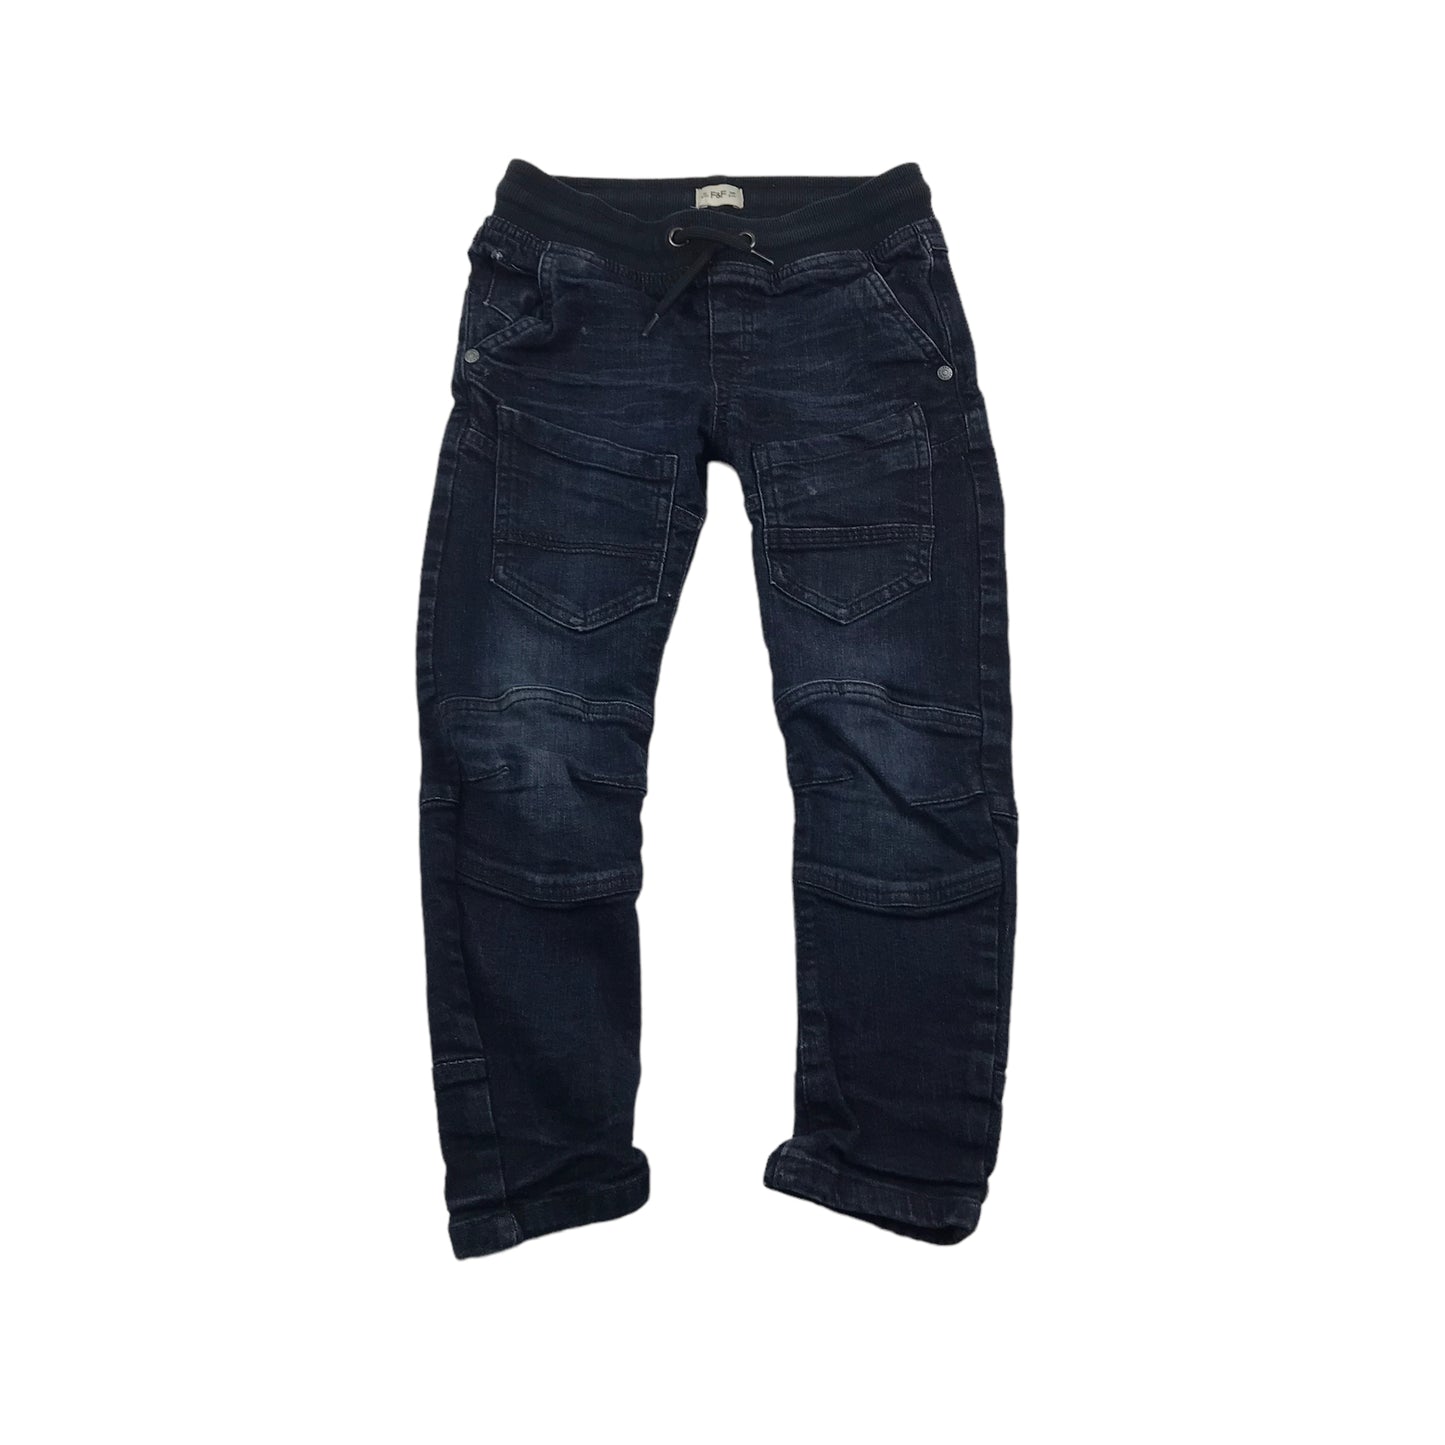 F&F Navy Denim Style Trousers Age 6